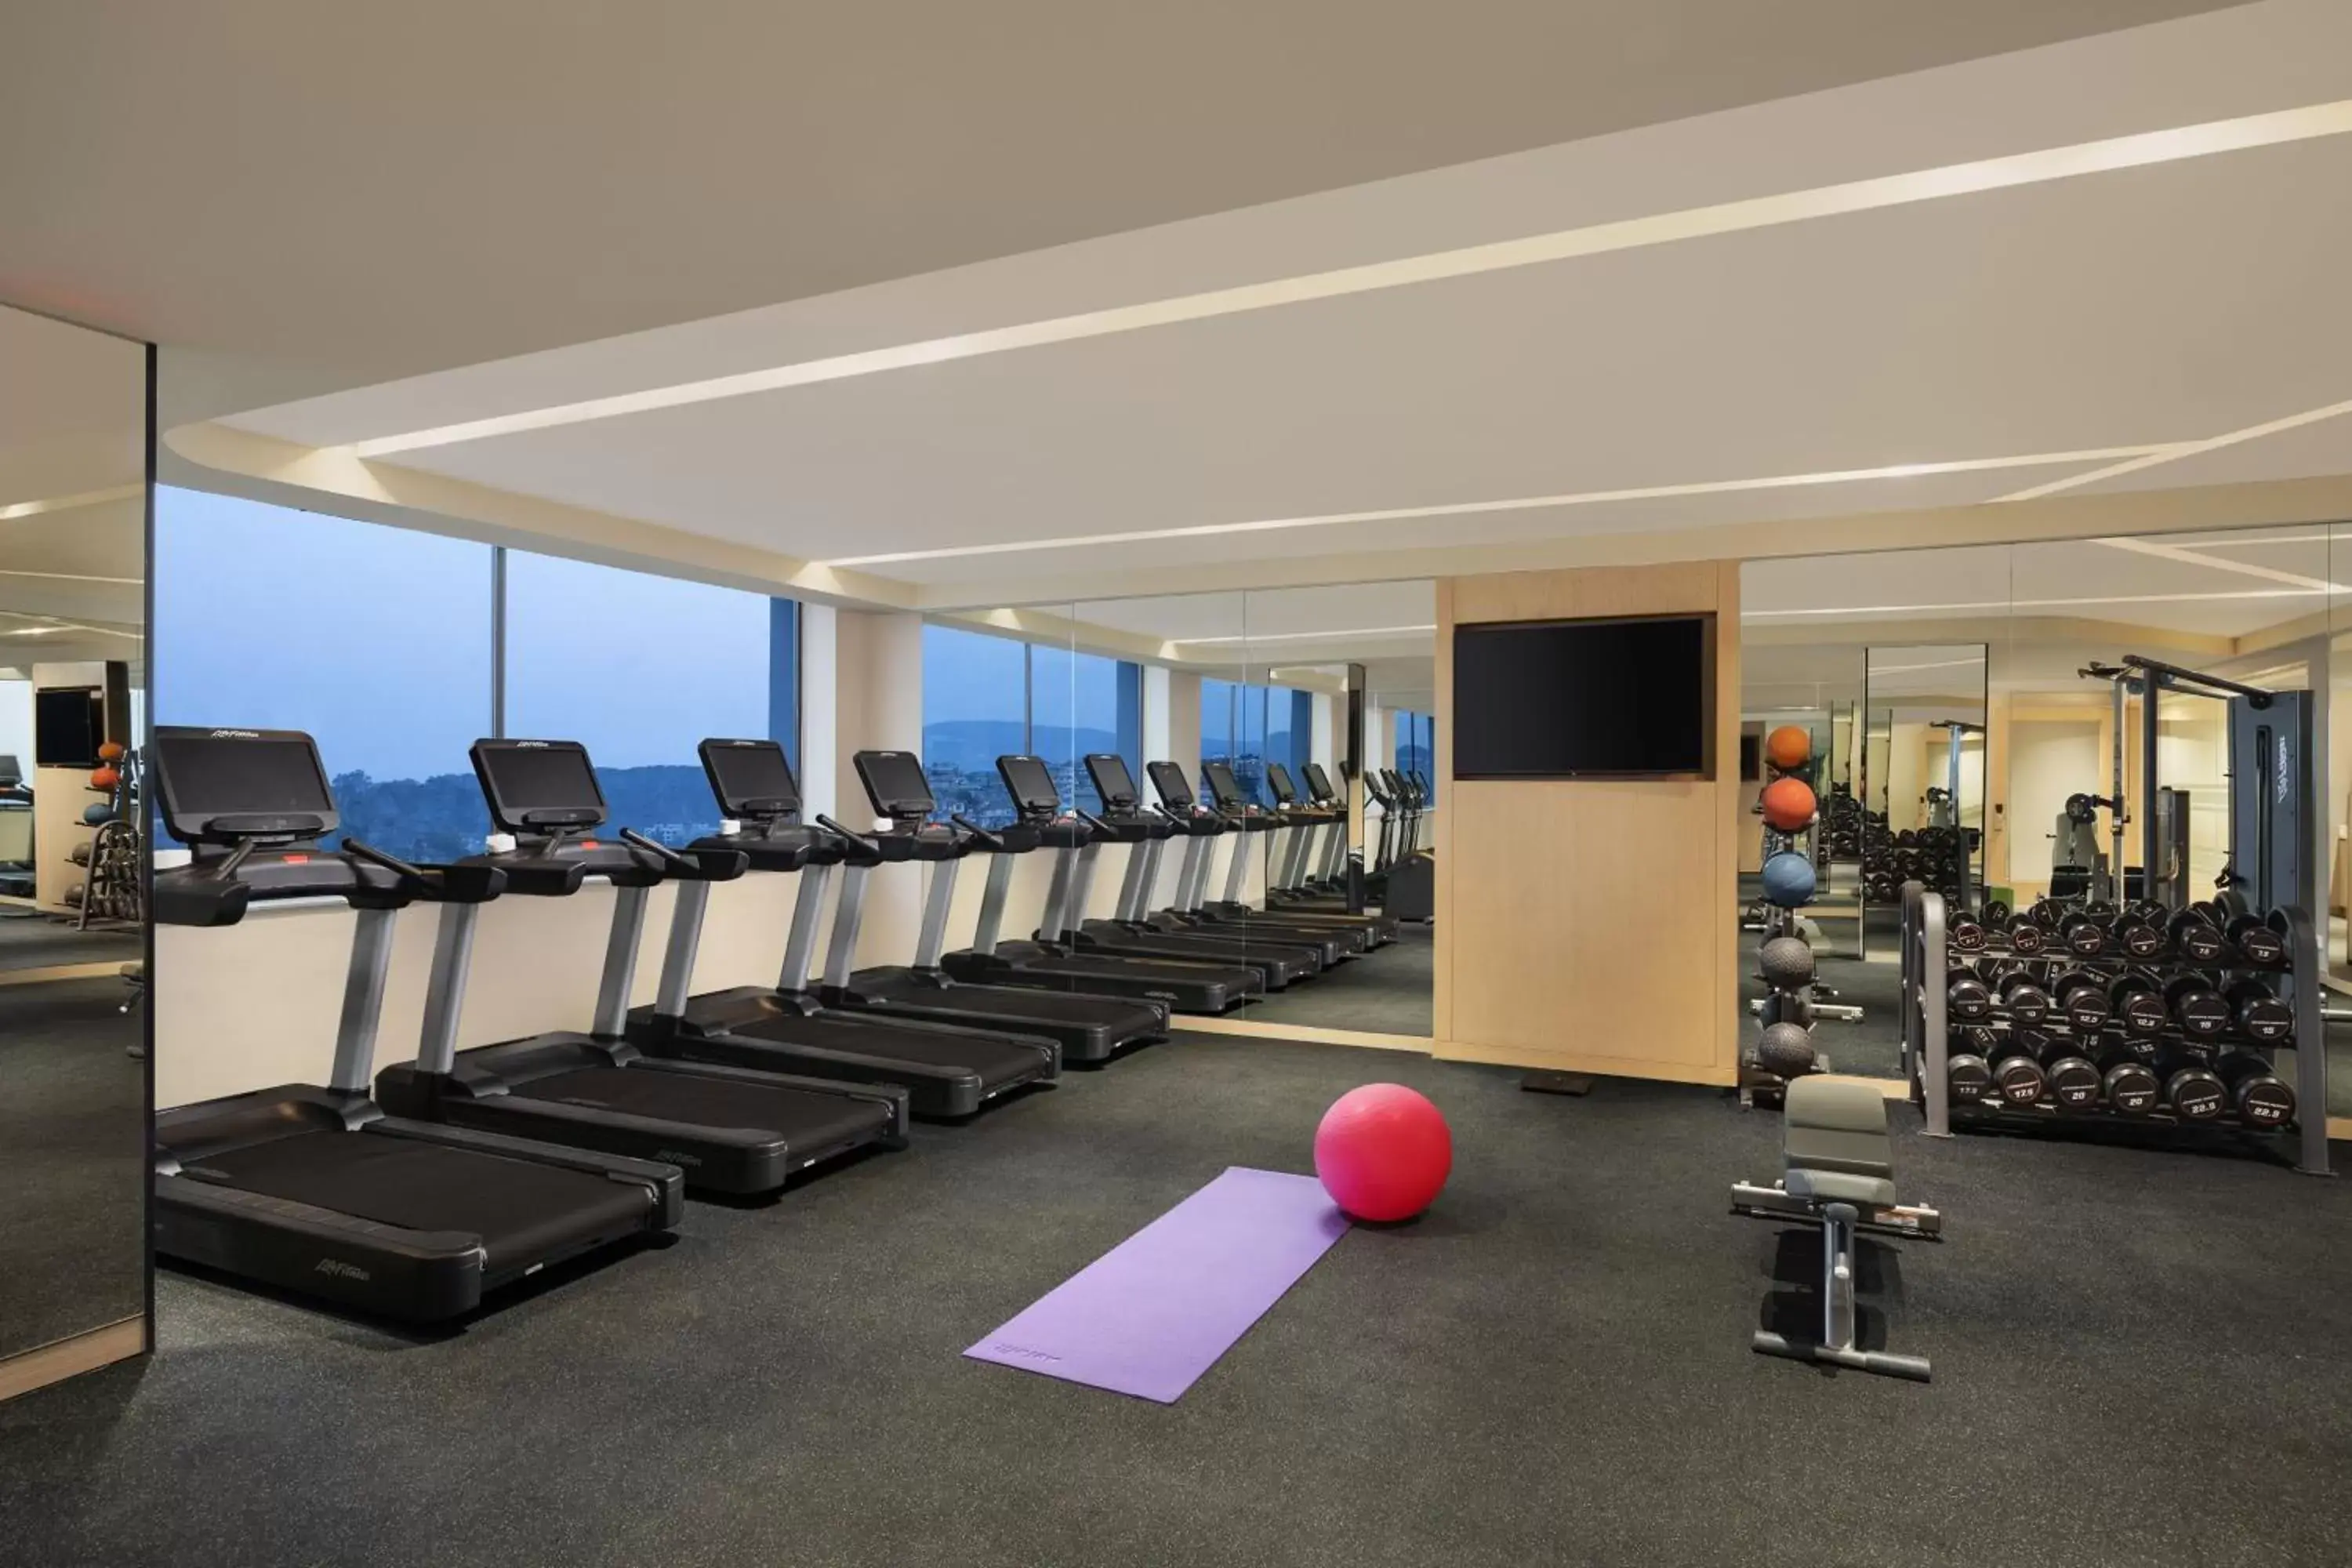 Fitness centre/facilities, Fitness Center/Facilities in Courtyard by Marriott Shillong